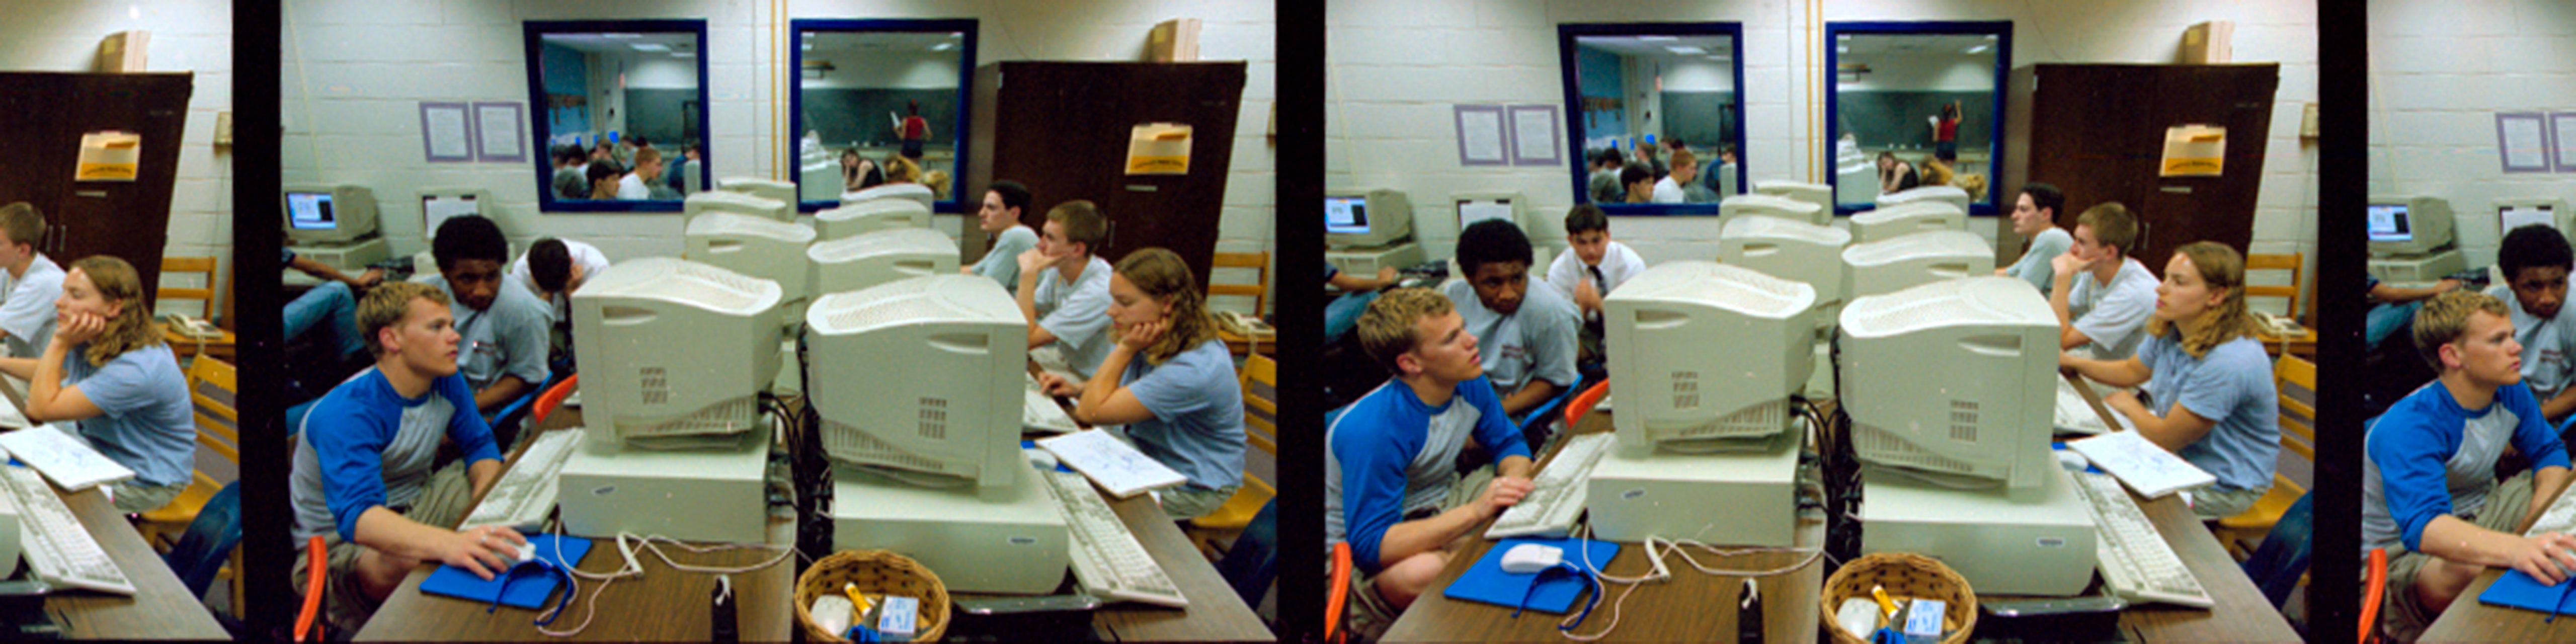 Three color photographs on a film strip showing male high school students working at computers